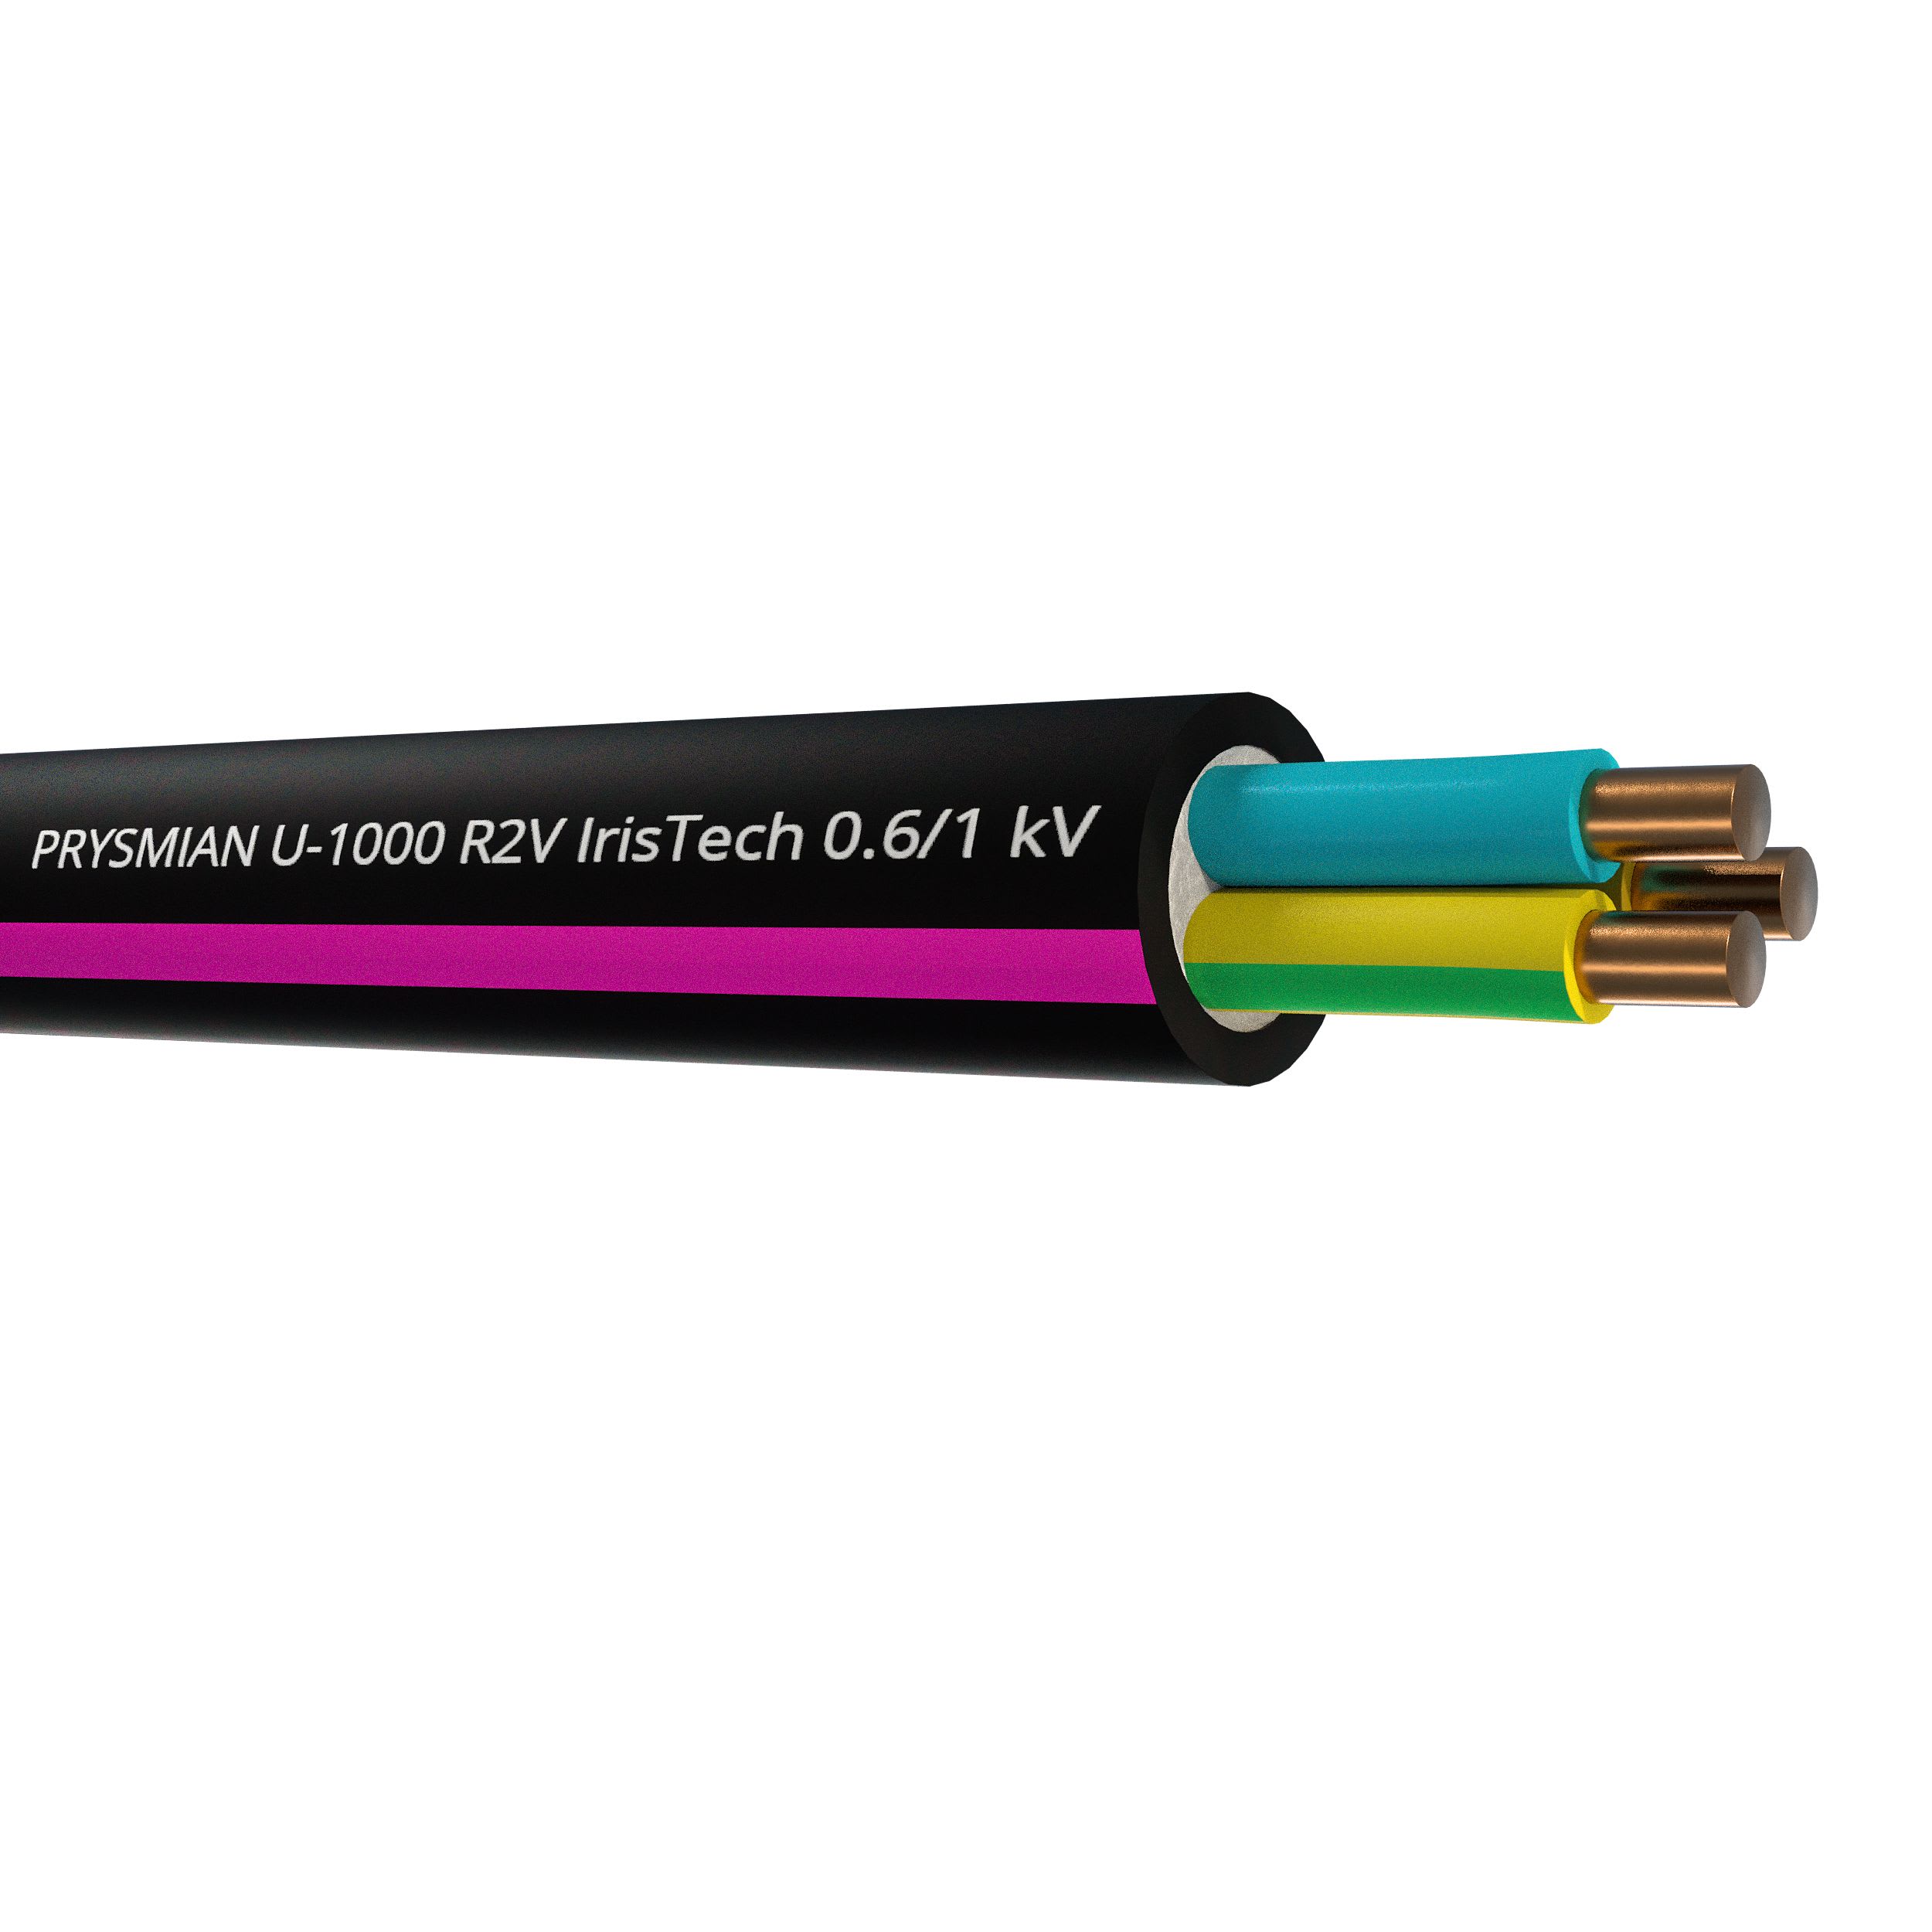 Cable industriel rigide U1000 R2V Iristech 5G6 * T500 Prysmian Energie  Cables & Systemes